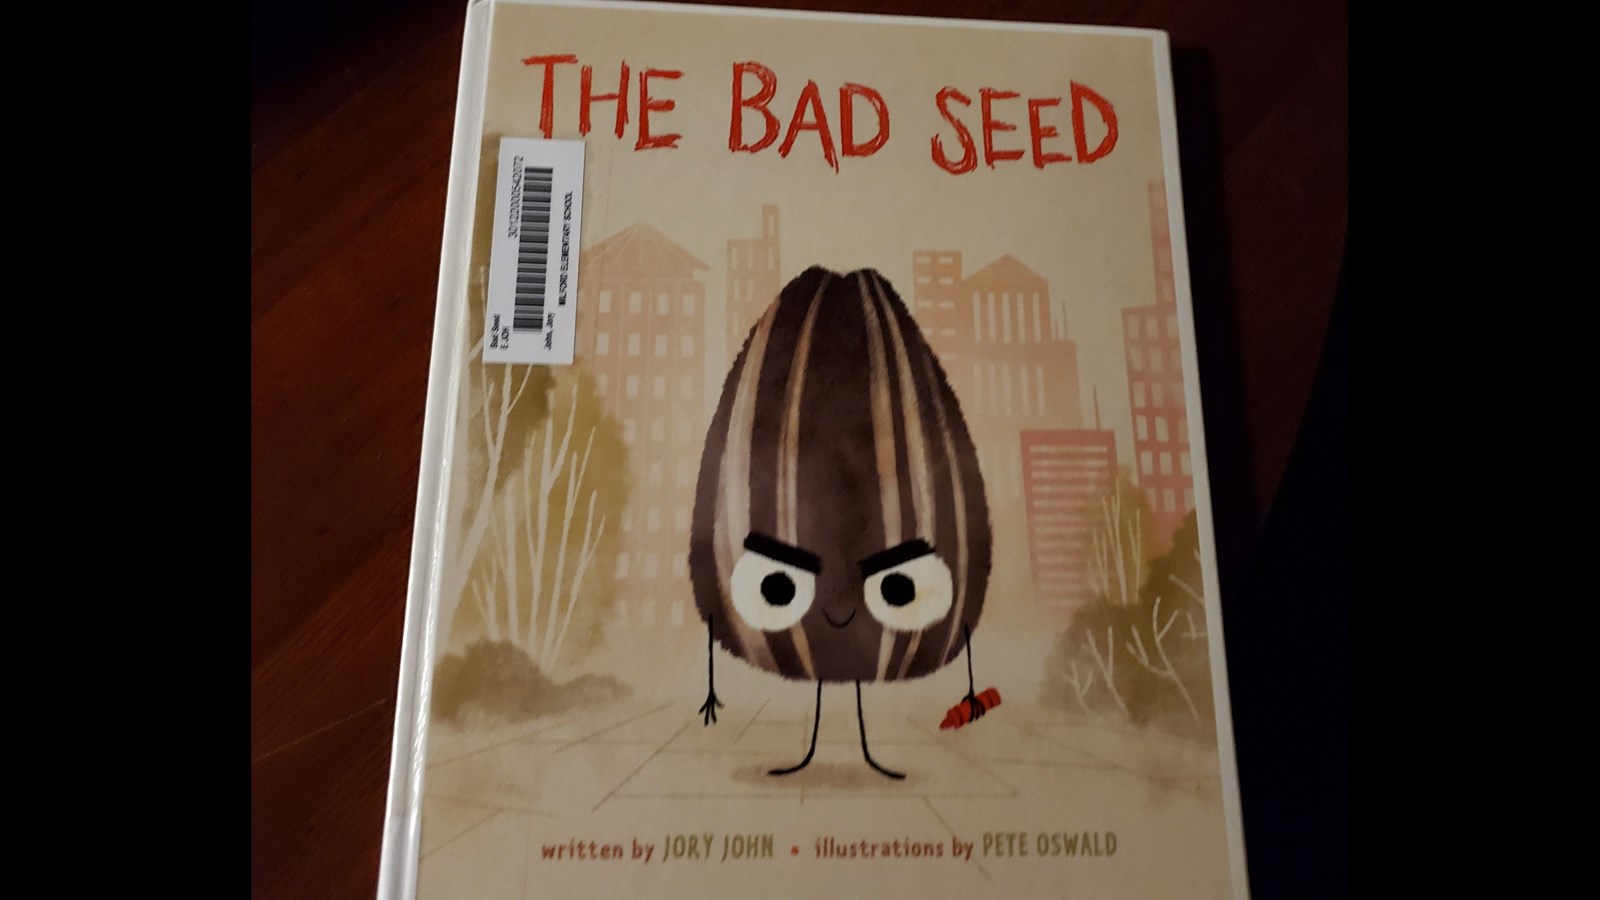 1/26: The Bad Seed